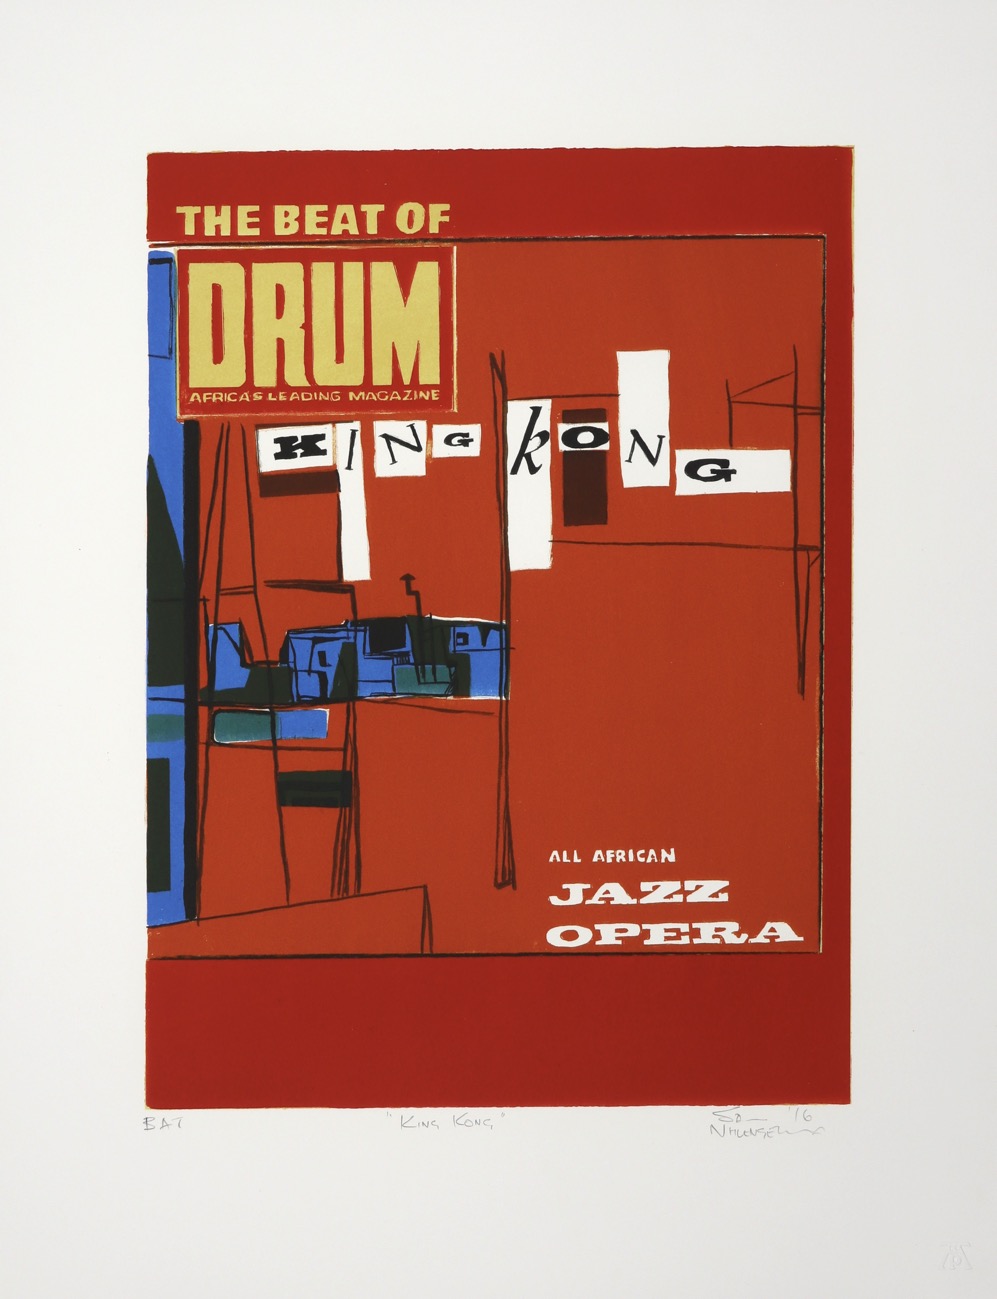 Red based abstract image with The Beat of Drum and All African Jazz Opera written on it.